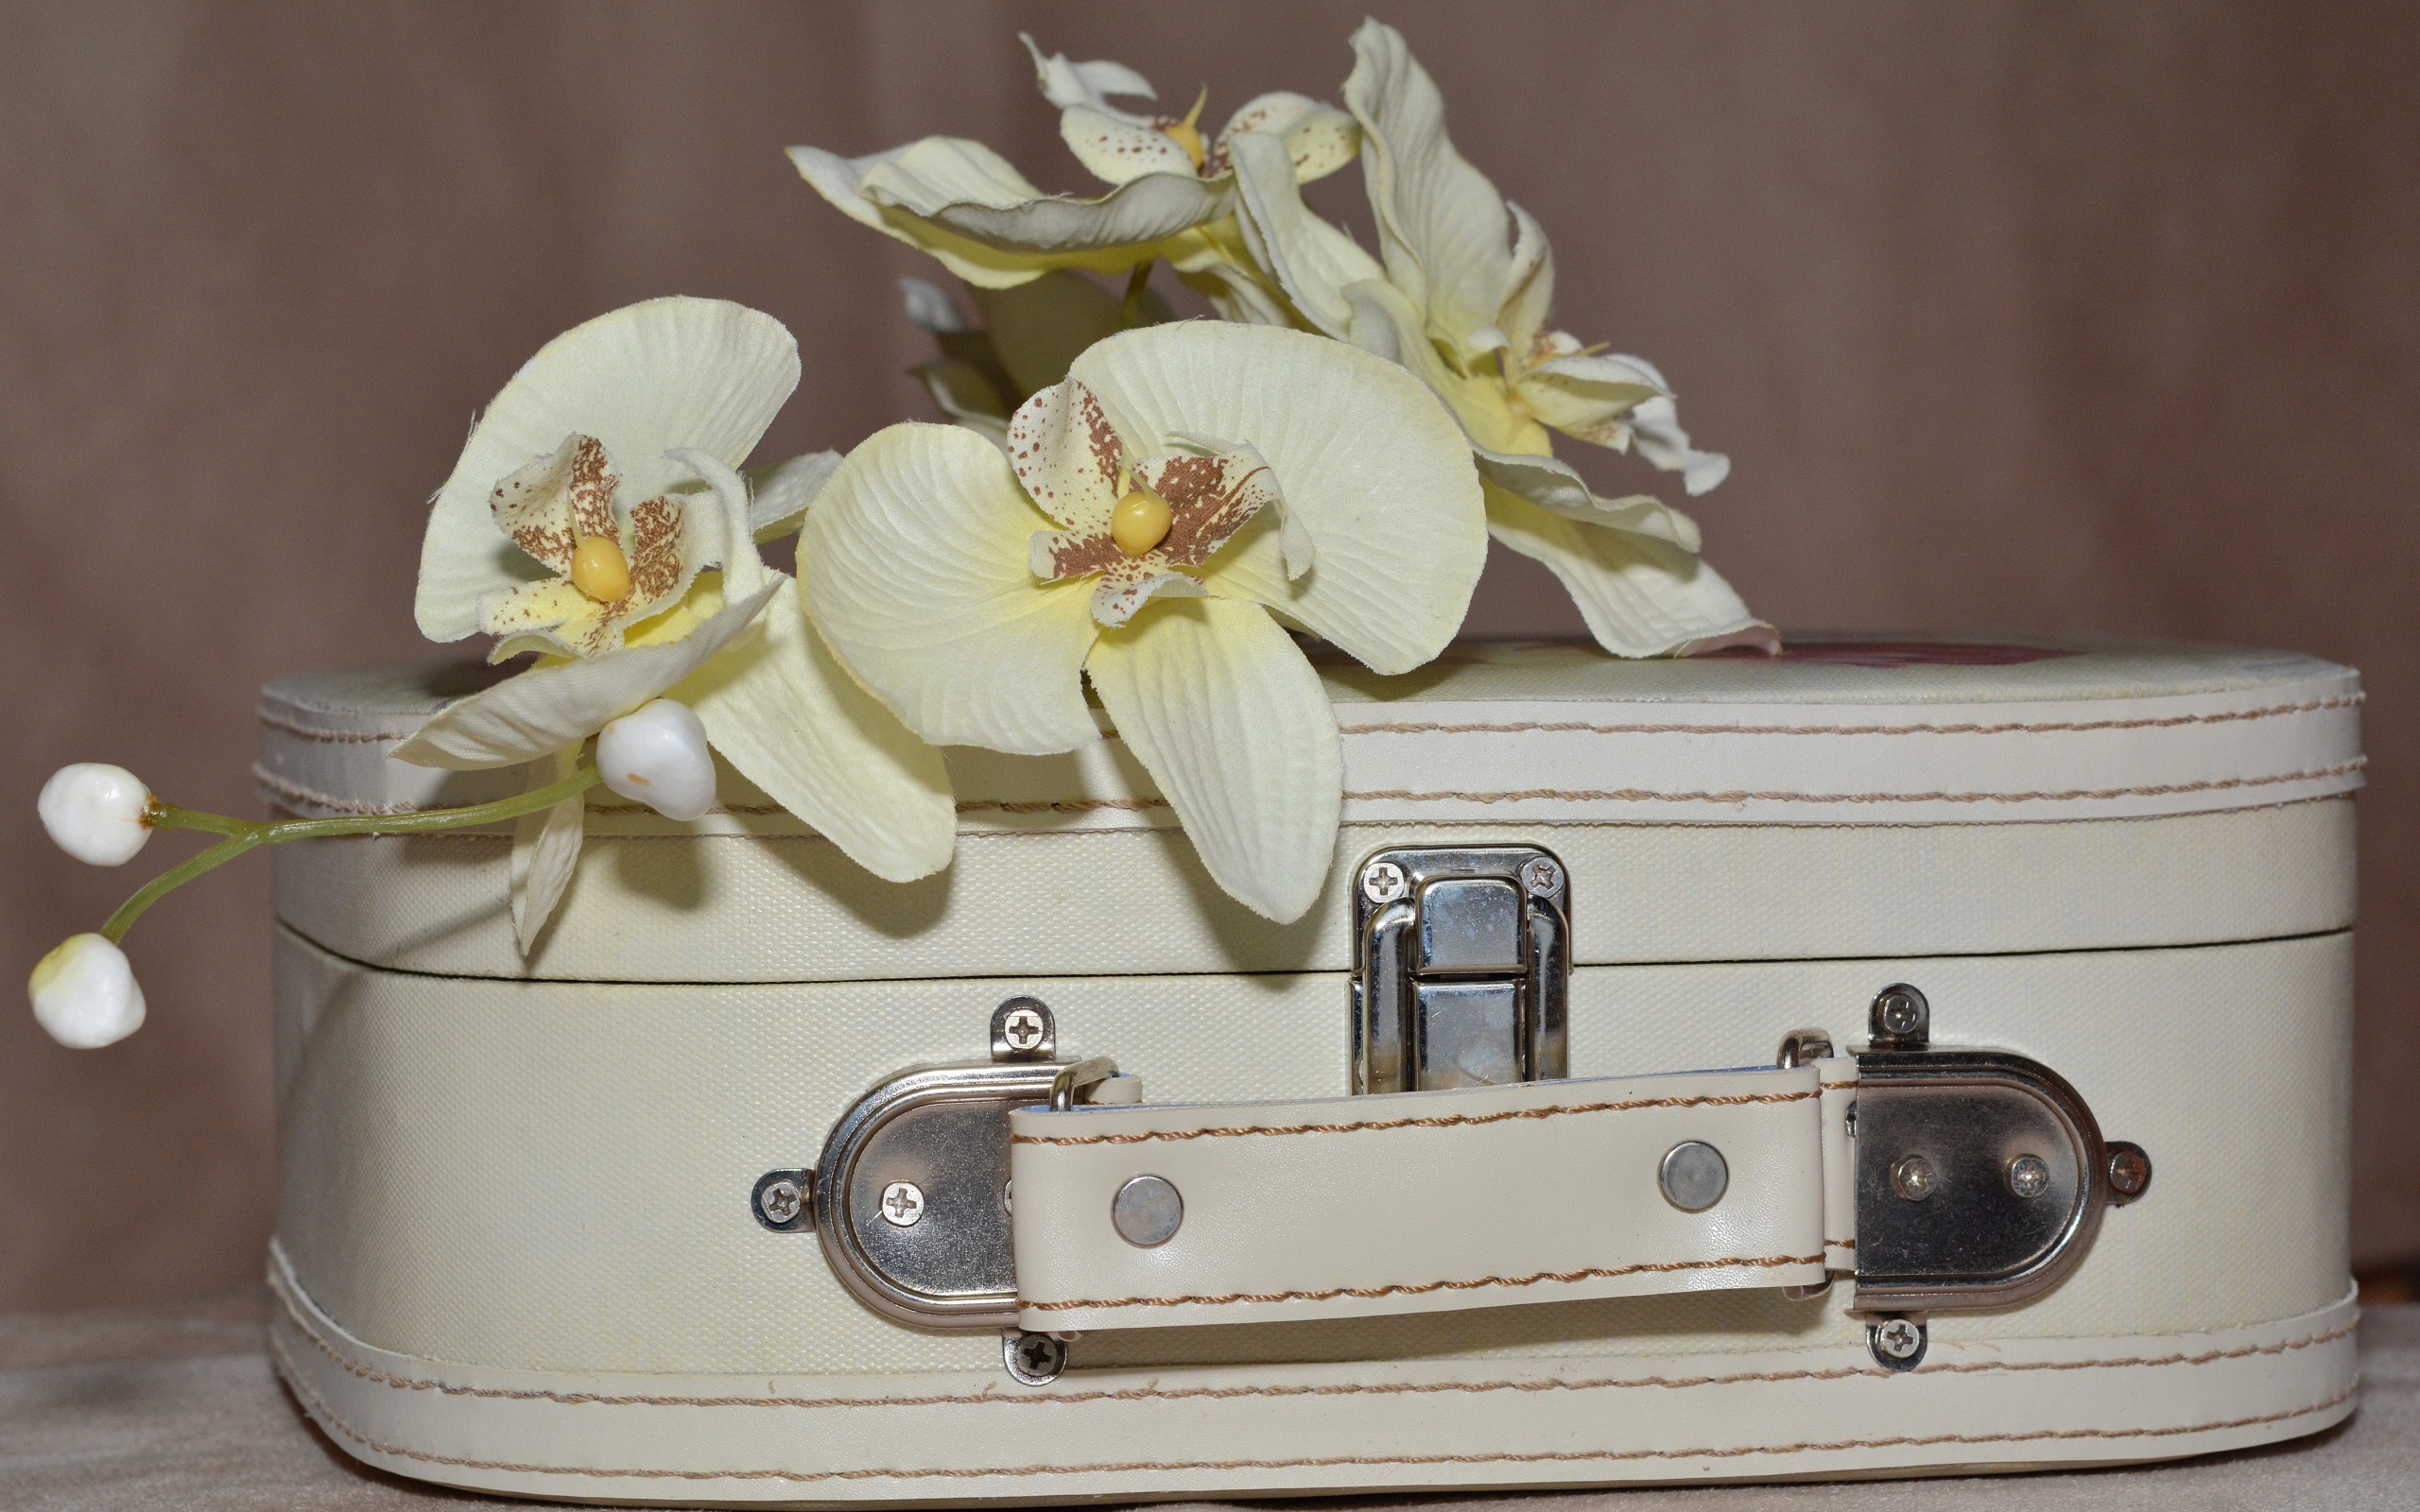 A branch of orchid flowers lies on a white suitcase